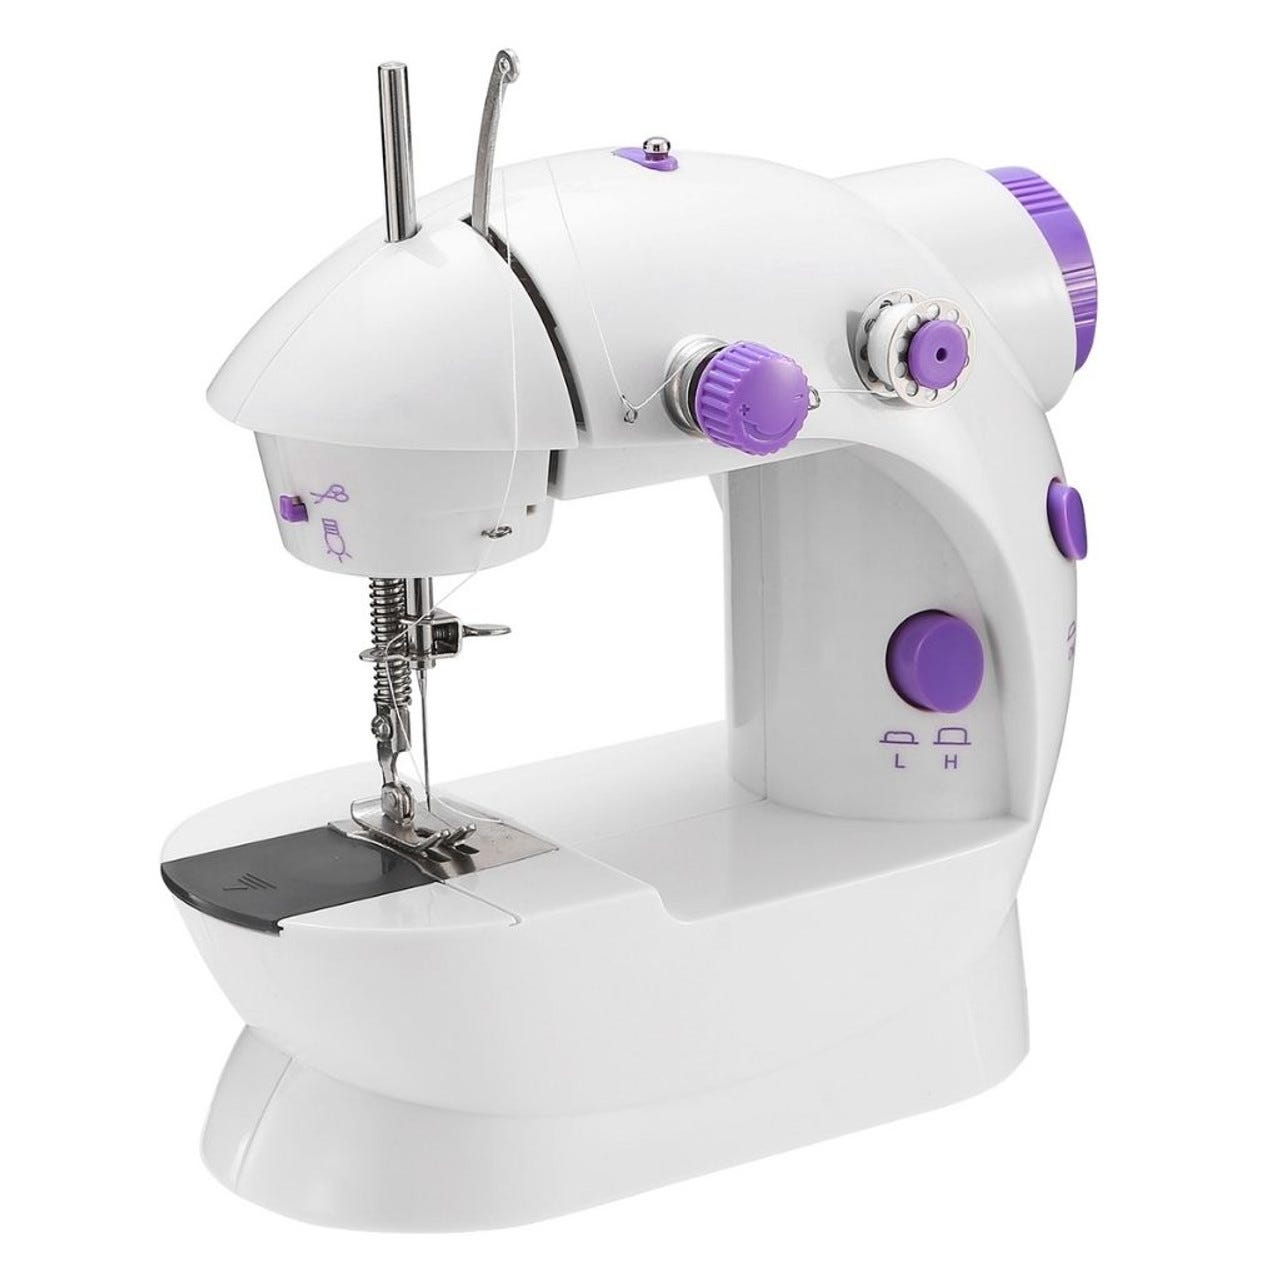 White and purple sewing machine with dials and a needle plate.